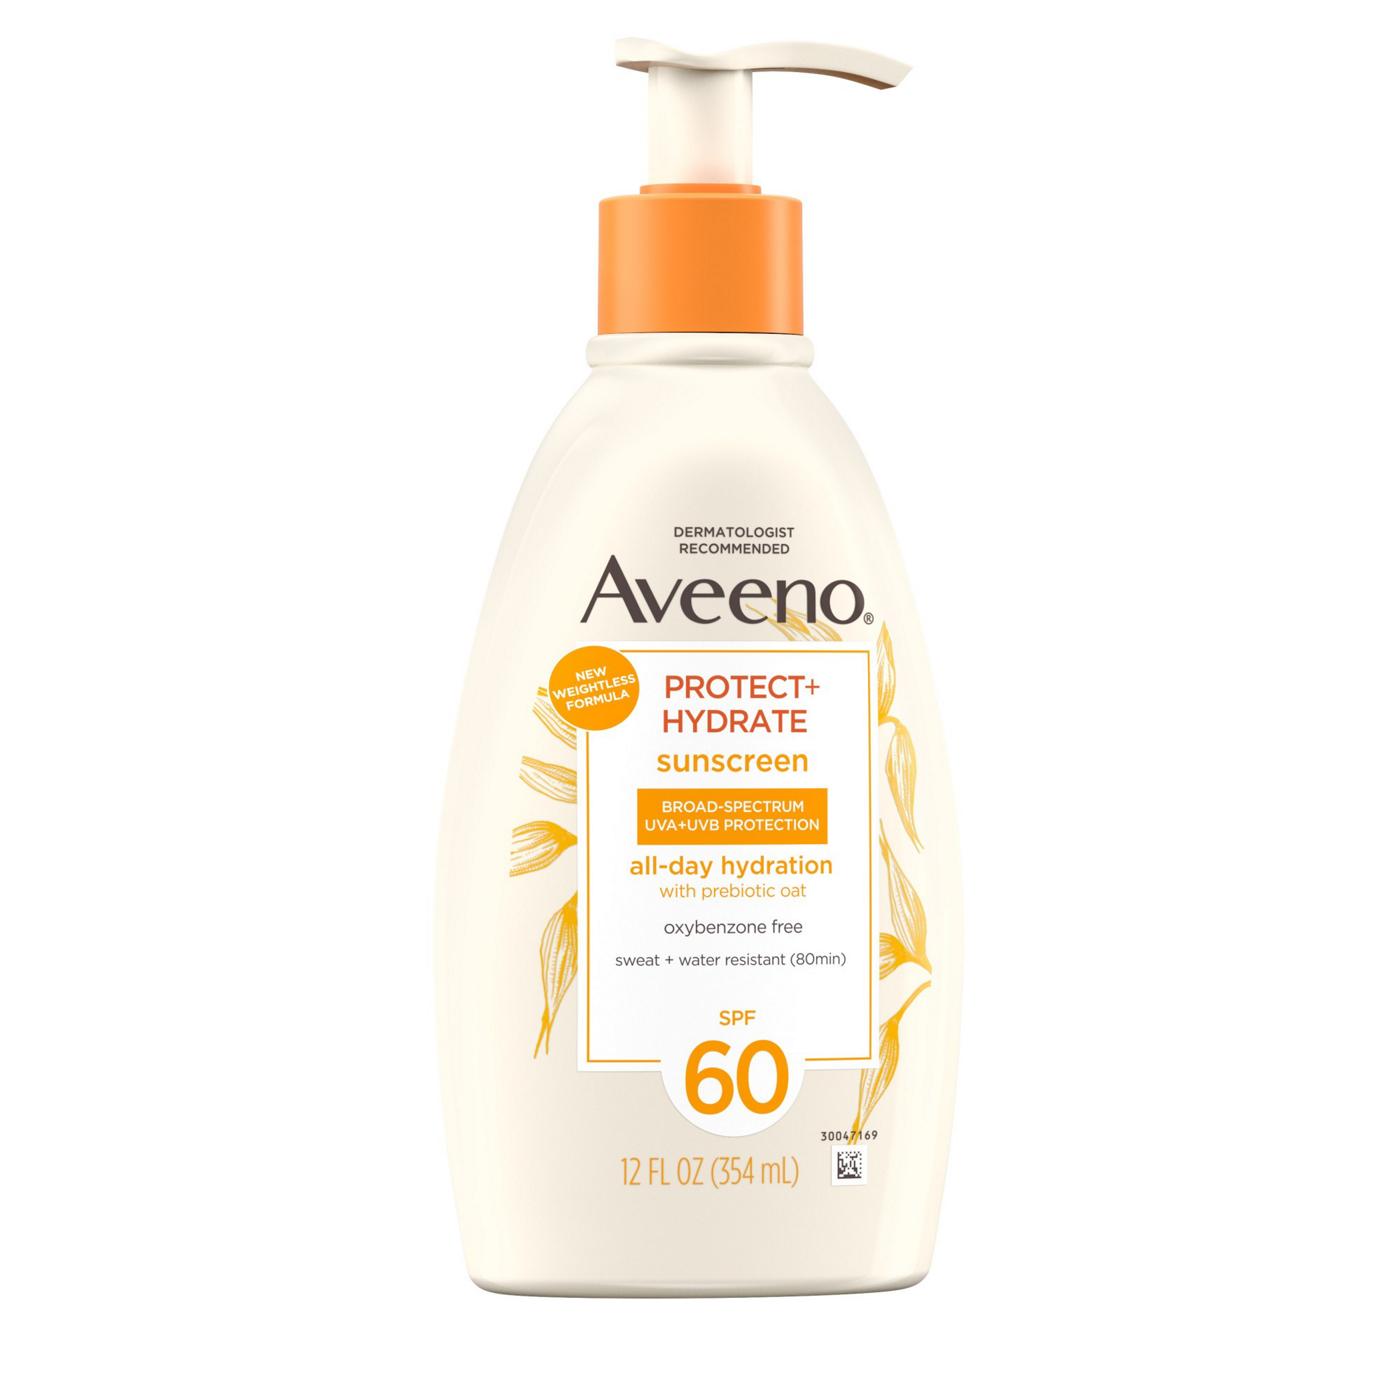 Aveeno Protect + Hydrate Sunscreen SPF 60; image 6 of 7